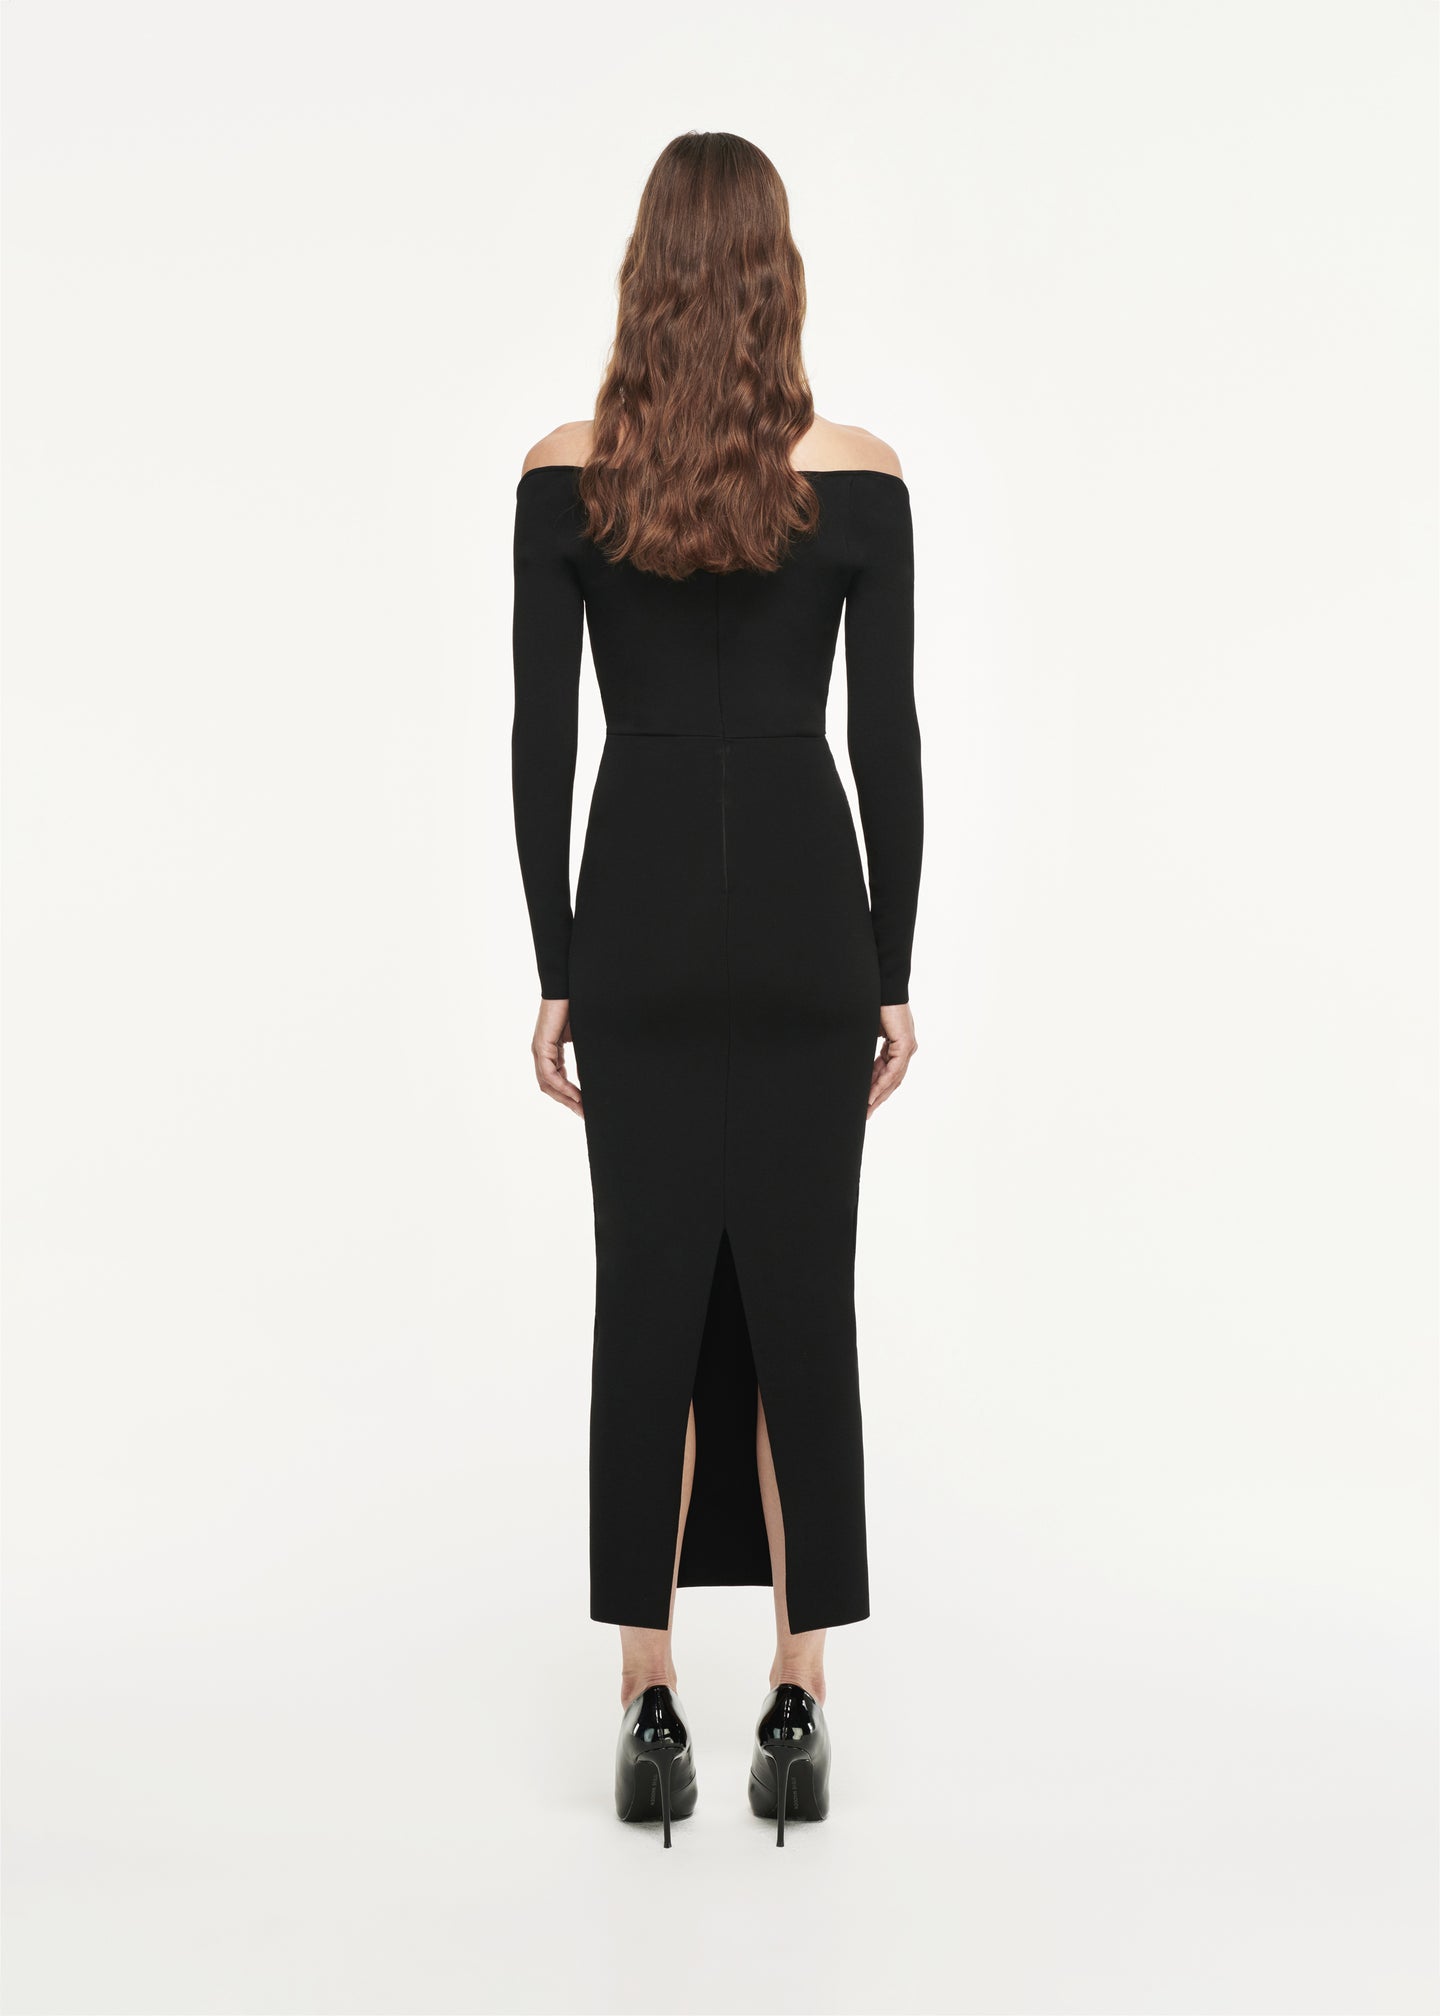 The back of a woman wearing the Long Sleeve Knit Midi Dress in Black